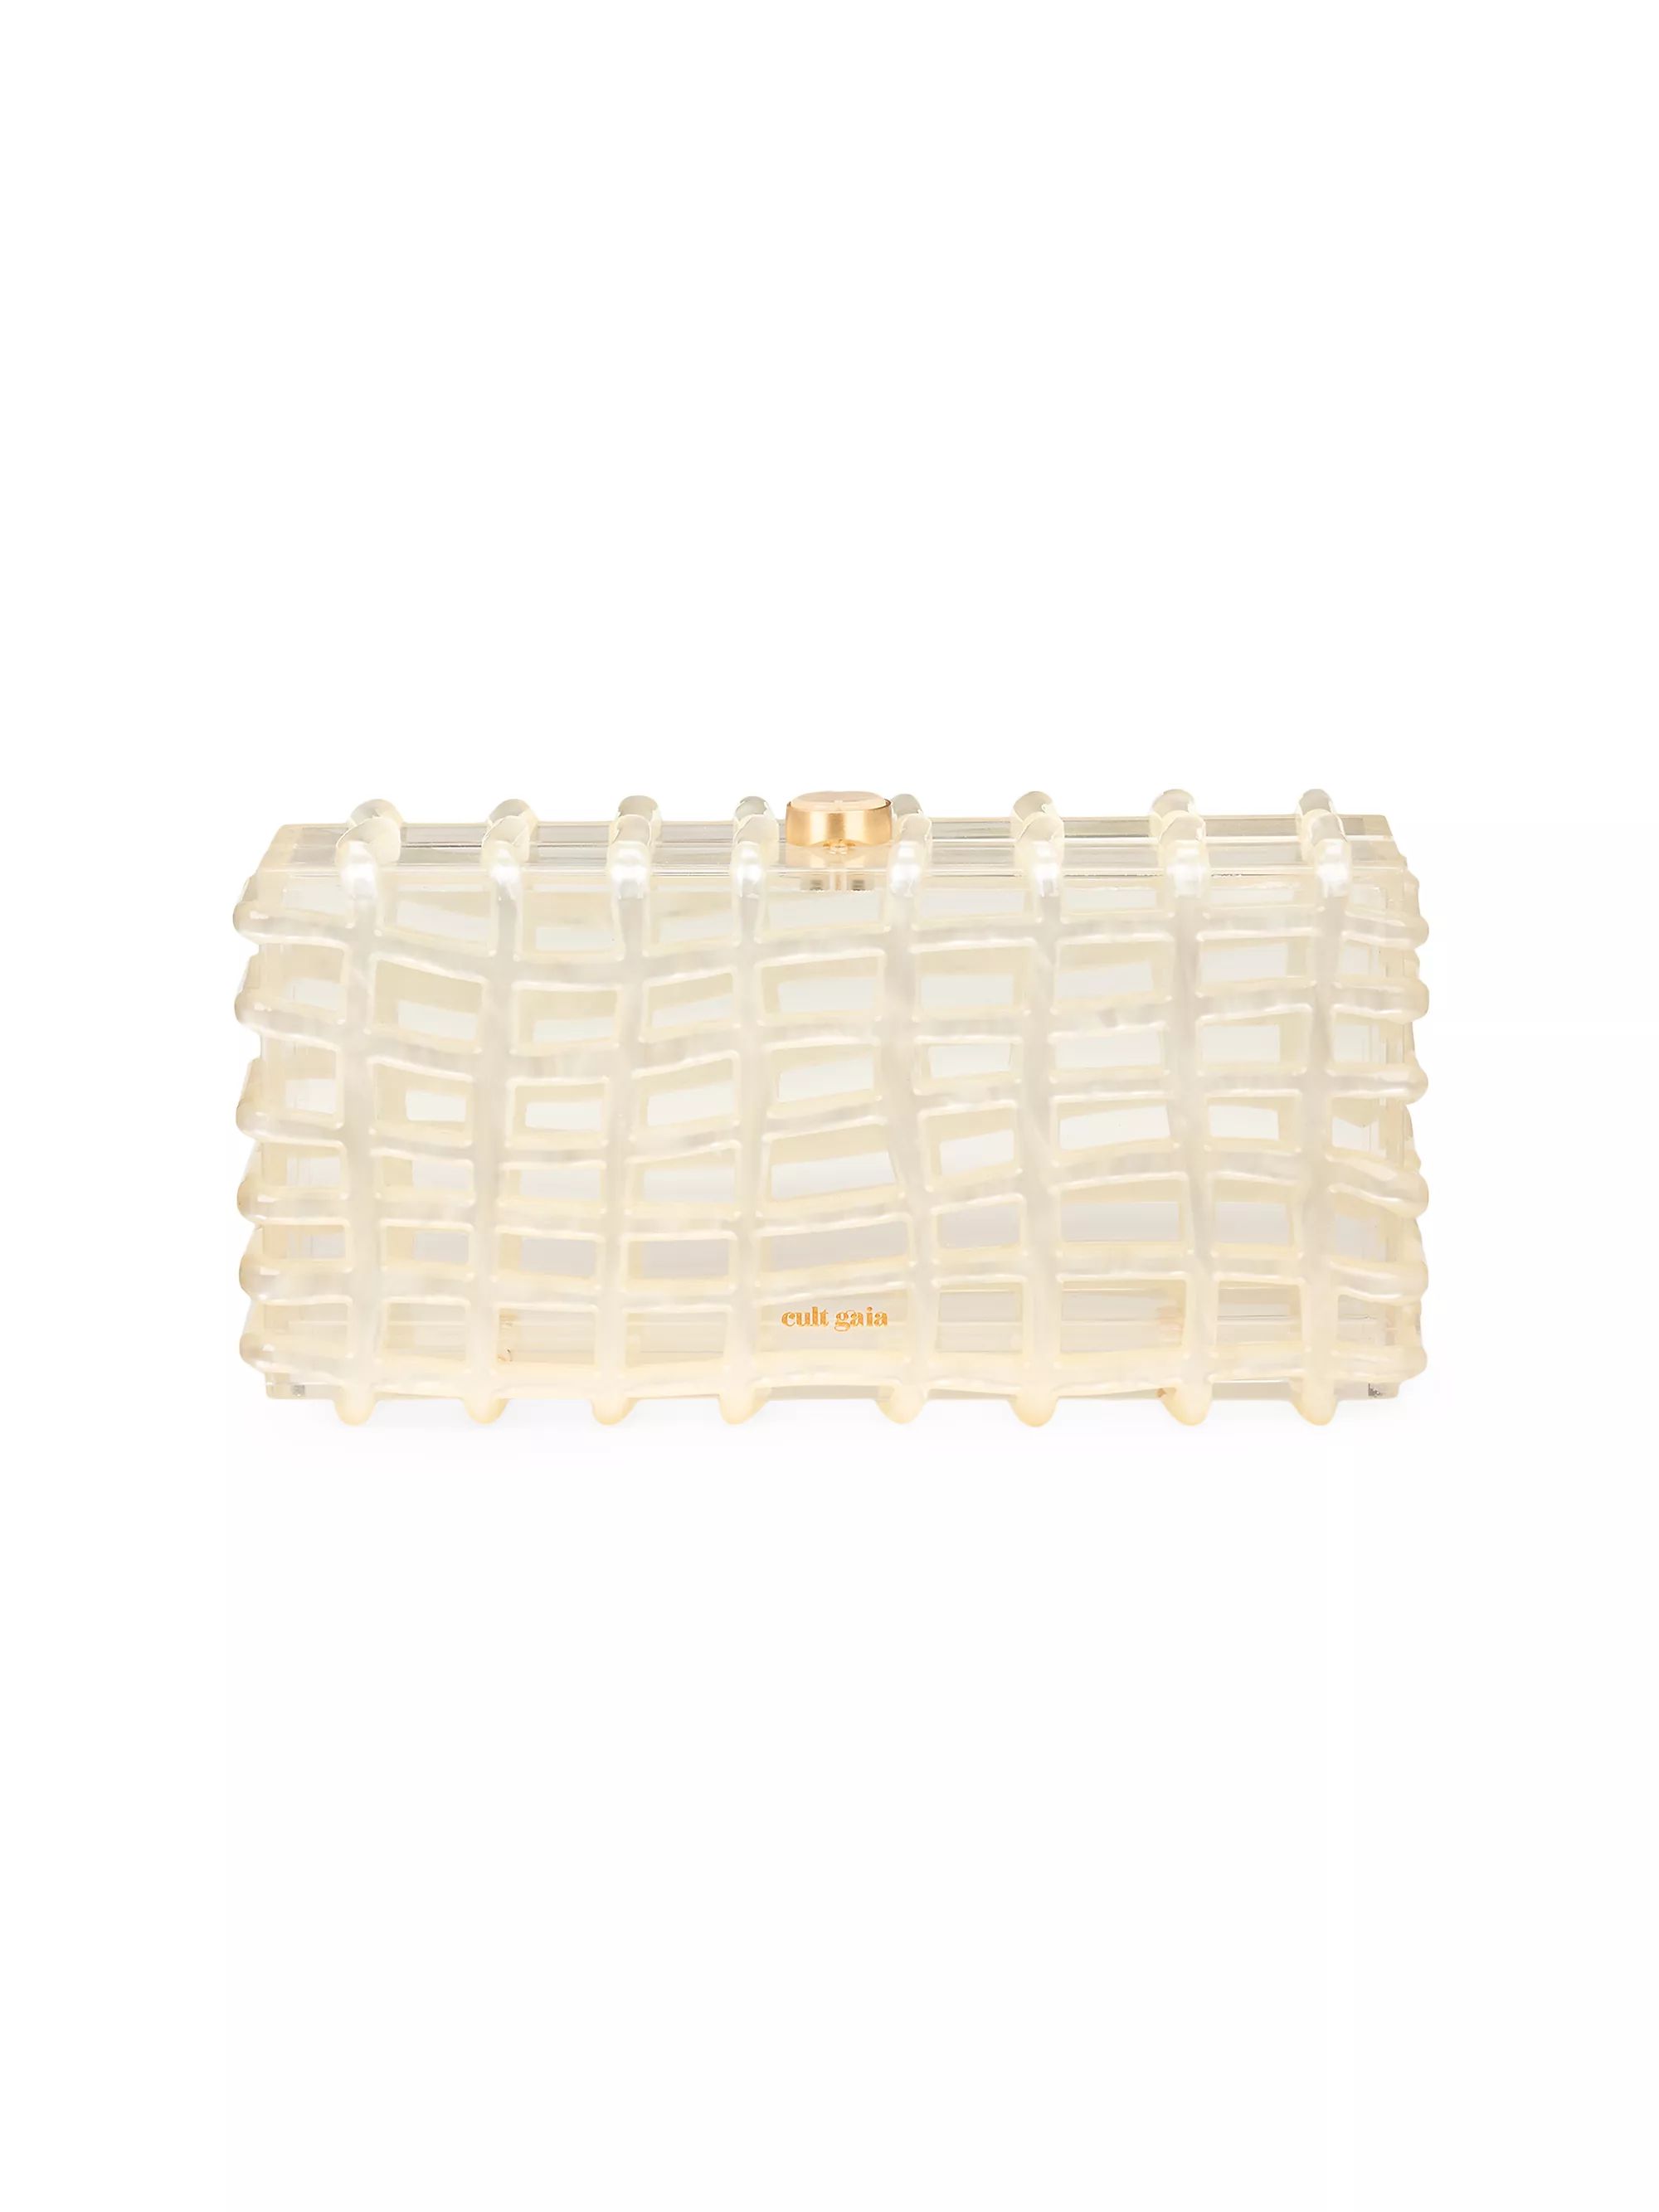 IvoryAll Clutches & PouchesCult GaiaRina Acrylic Clutch$388
            
          20% Off $250+ ... | Saks Fifth Avenue